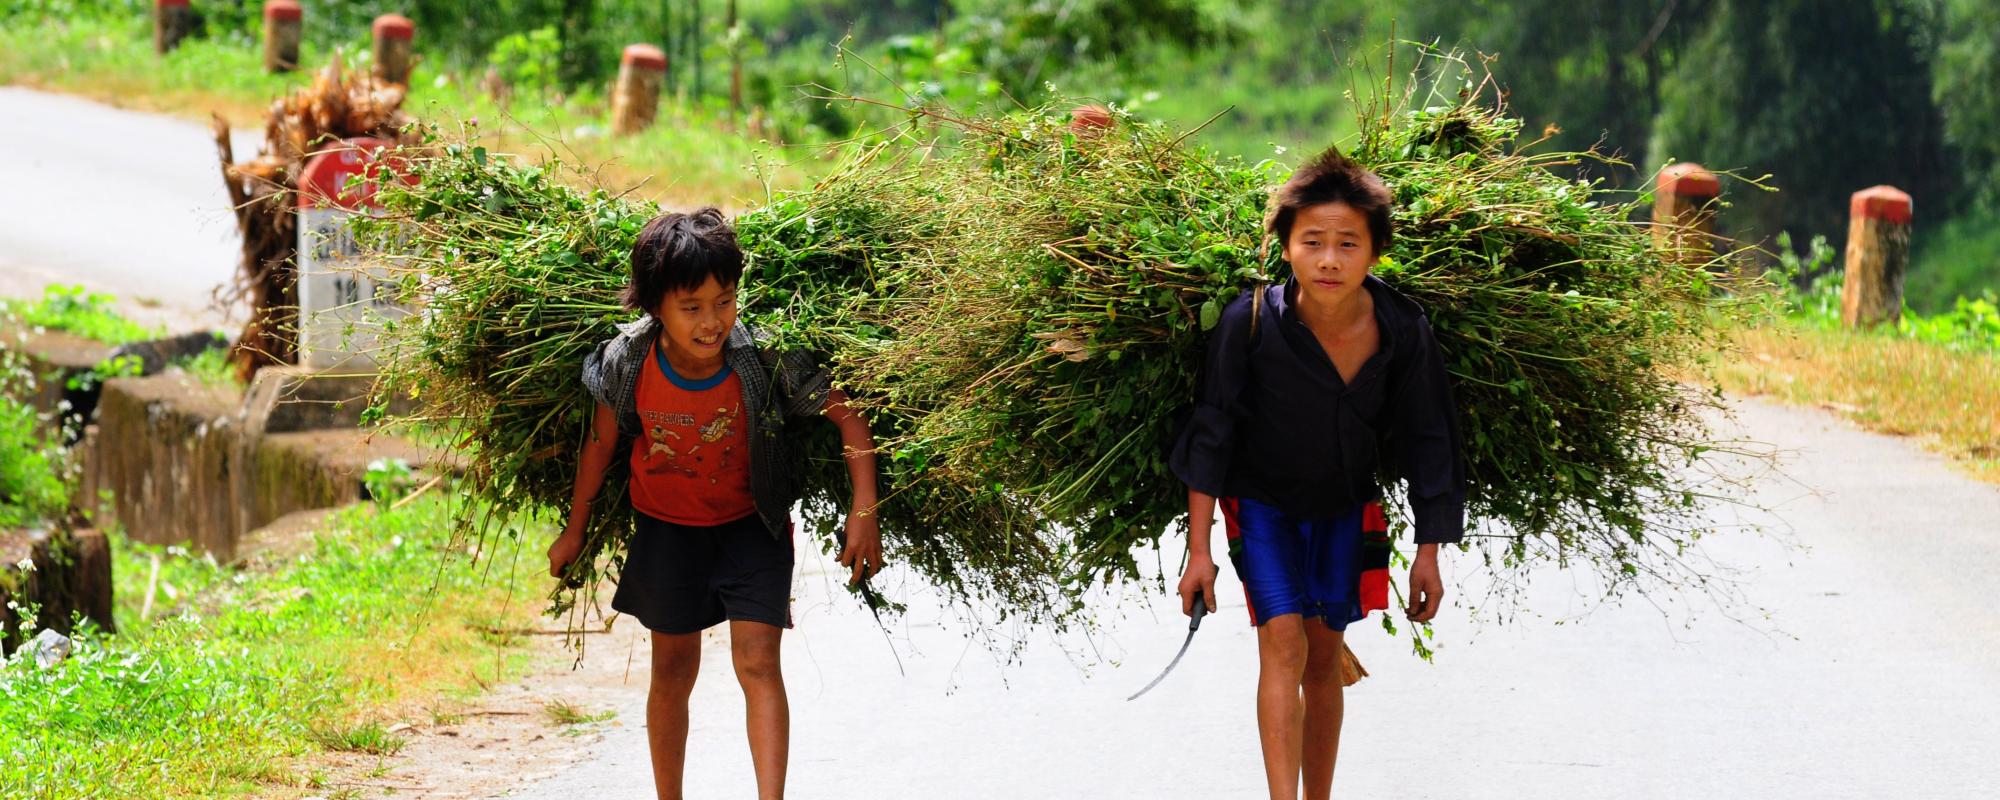 Boys carrying bales of grass